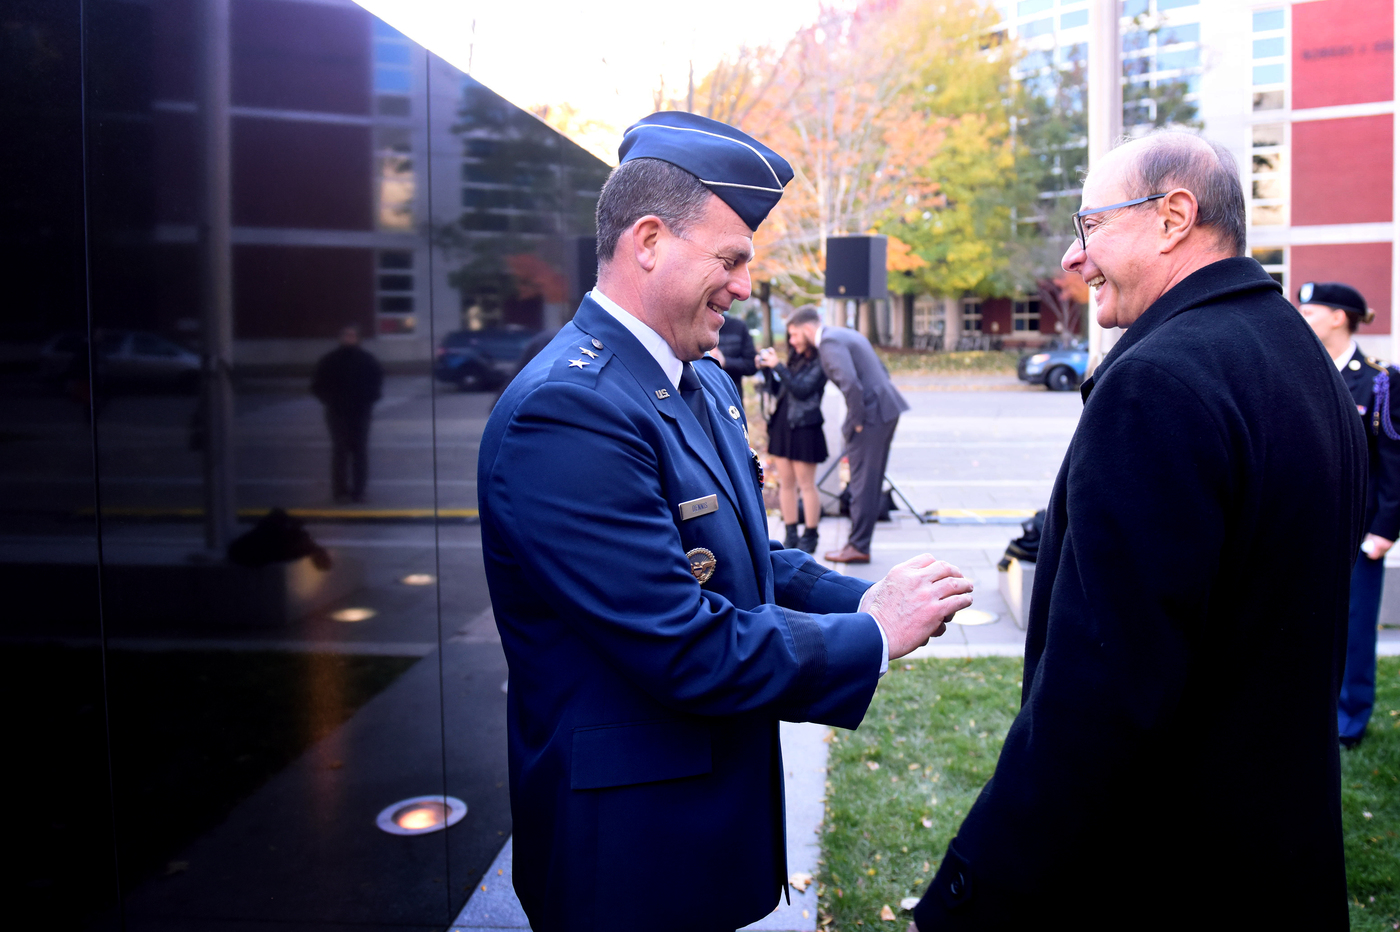 President Joseph E. Aoun, right, and Maj. Gen. Dwyer Dennis, program executive officer for C3I and networks at Hanscom Air Force Base, stand next to Northeastern’s Veterans Memorial on Neal F. Finnegan Plaza. <i>Photo by Matthew Modoono/Northeastern University</i>